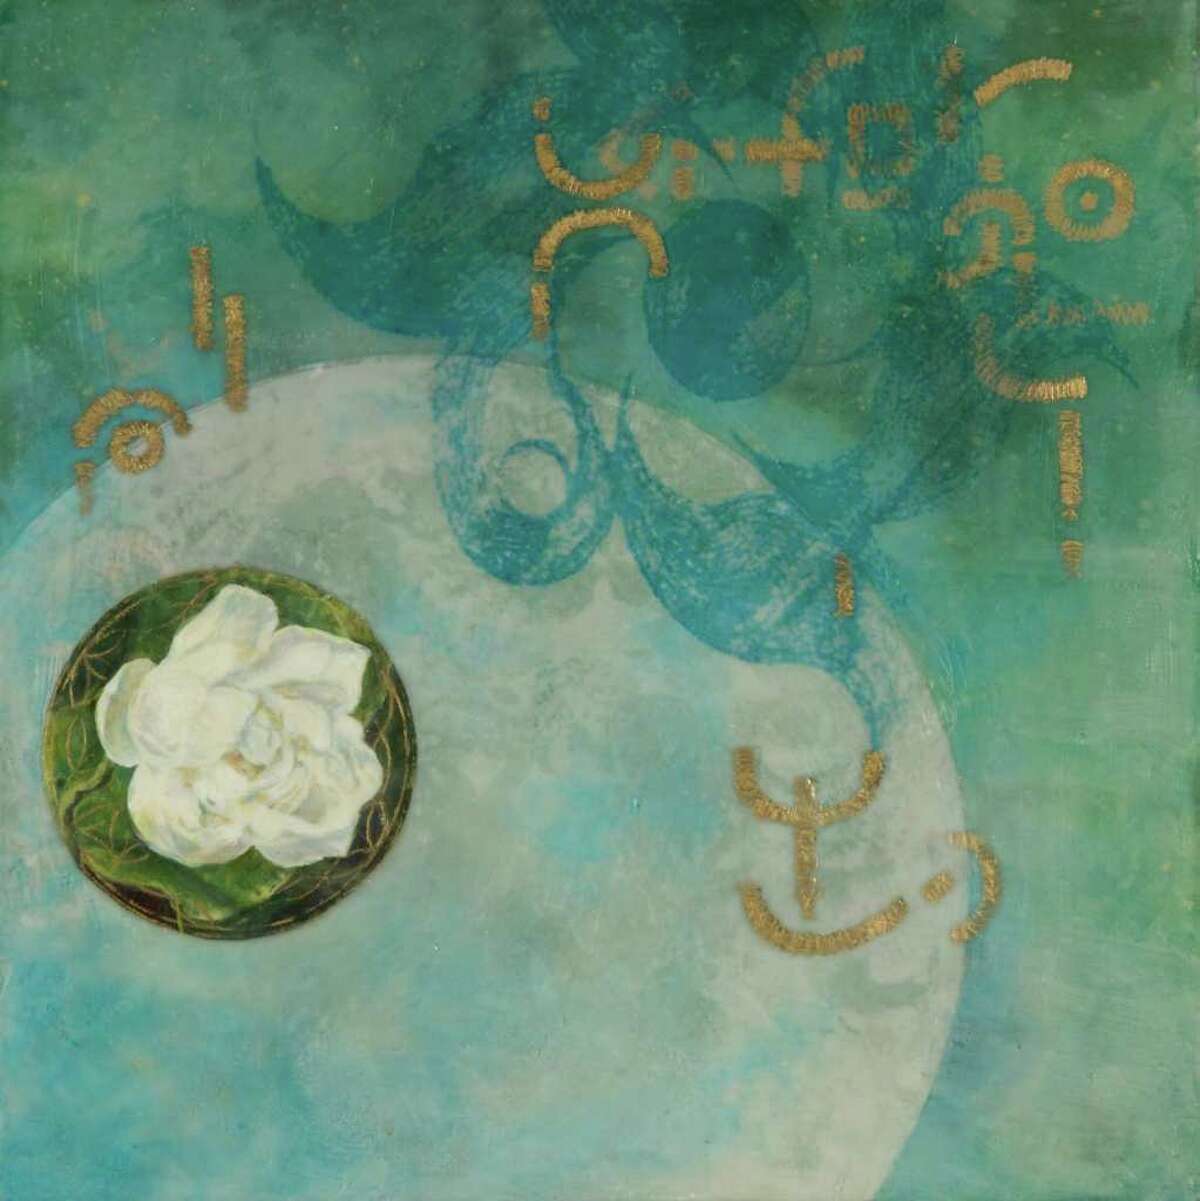 Martha Robinson's encaustic painting "Lotus Language I" will be included in the upcoming exhibition "Luminsity@180º" at the Flinn Gallery.